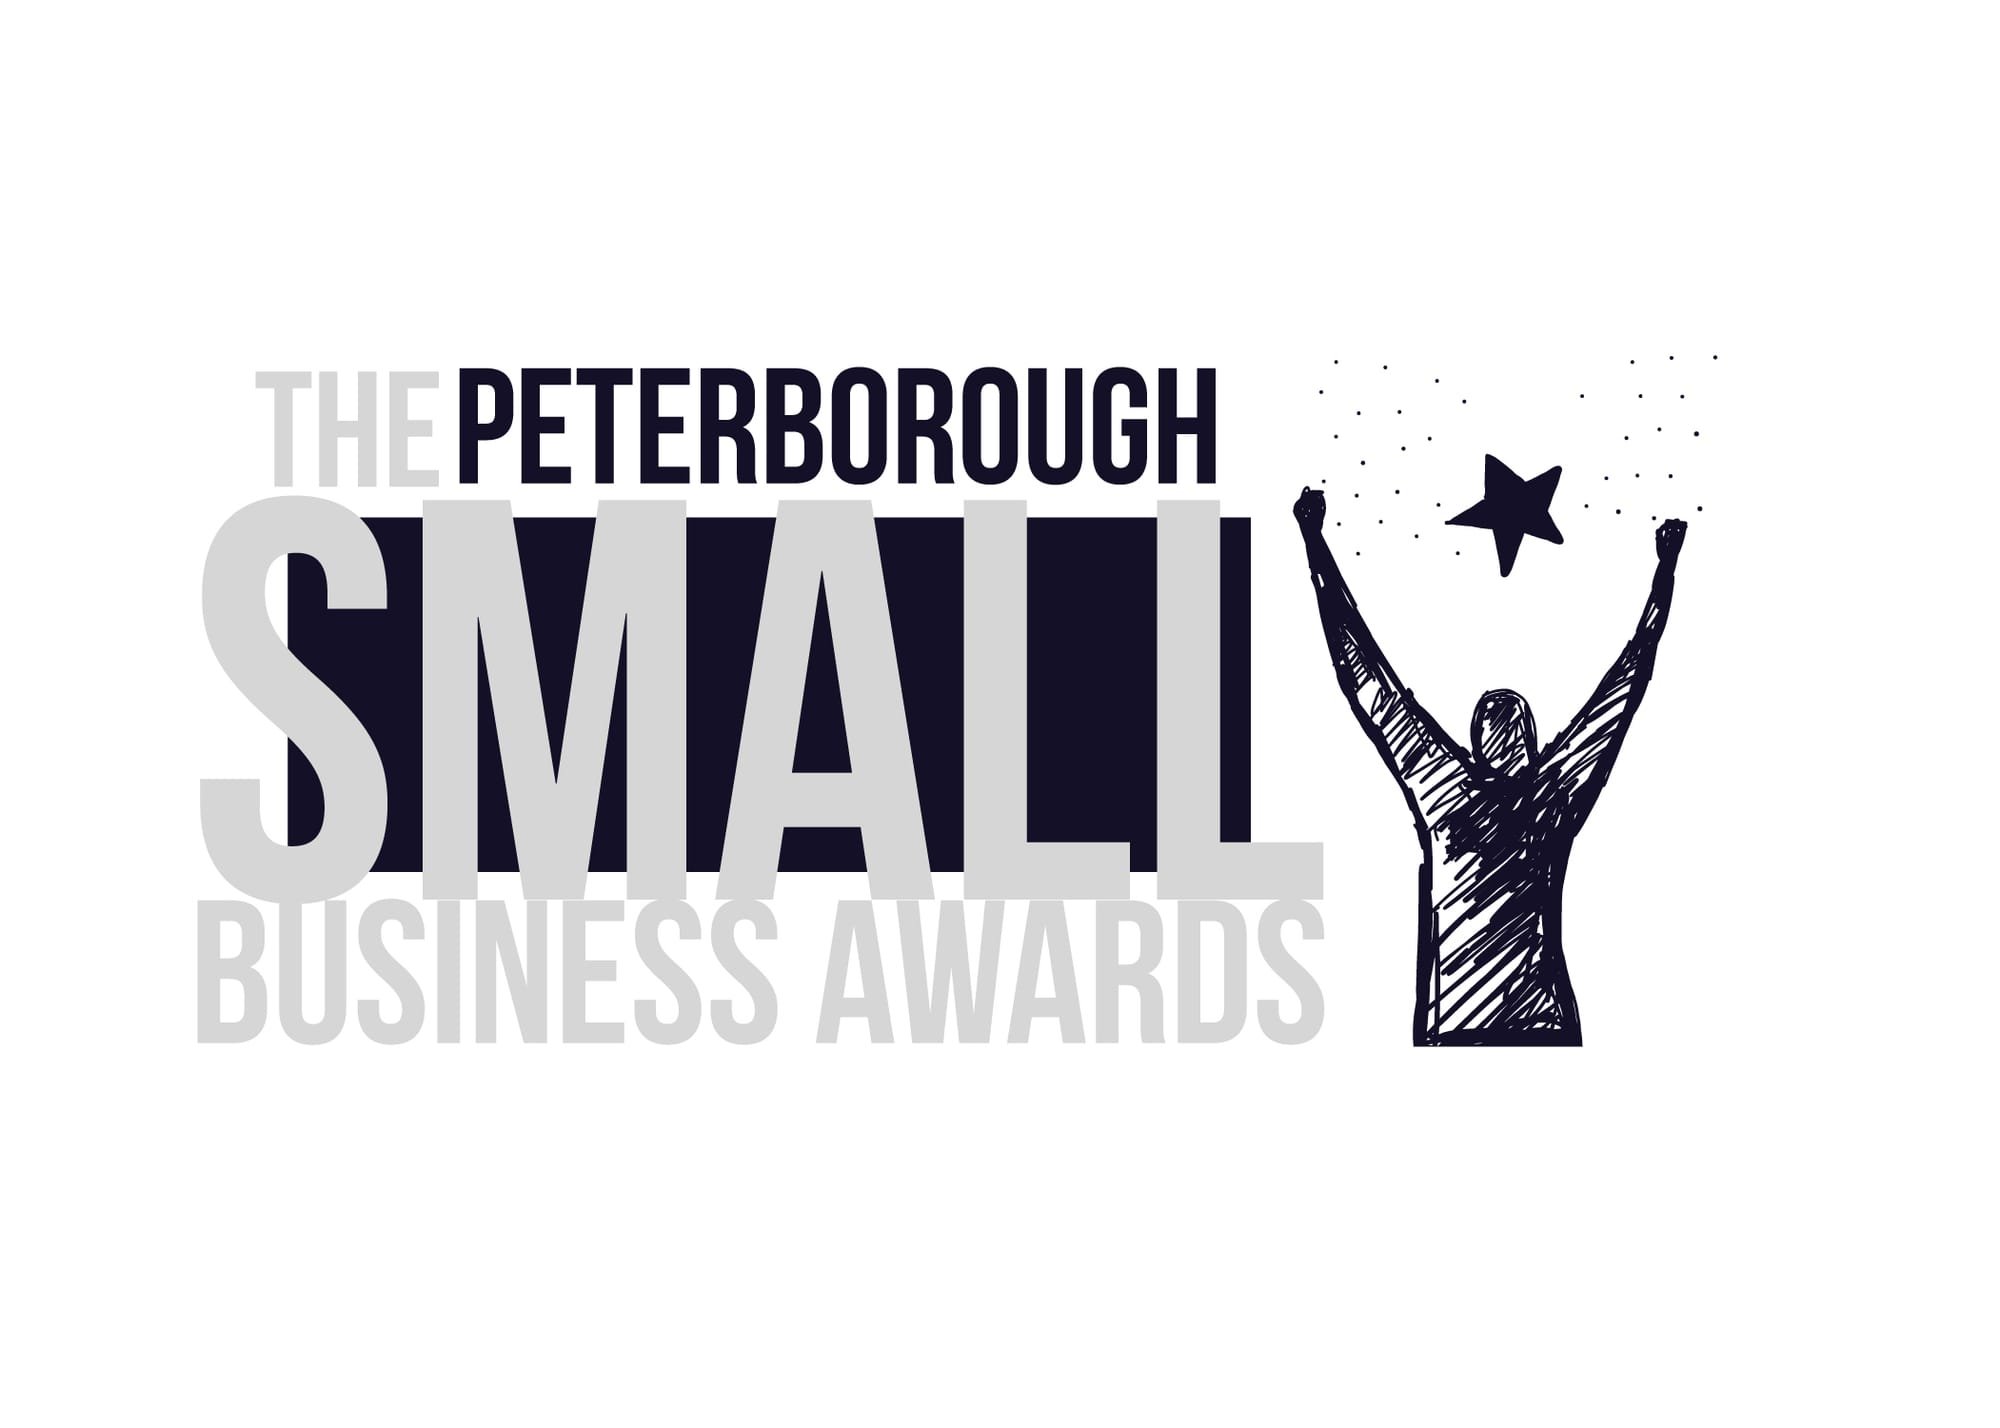 Ace Small Business Awards